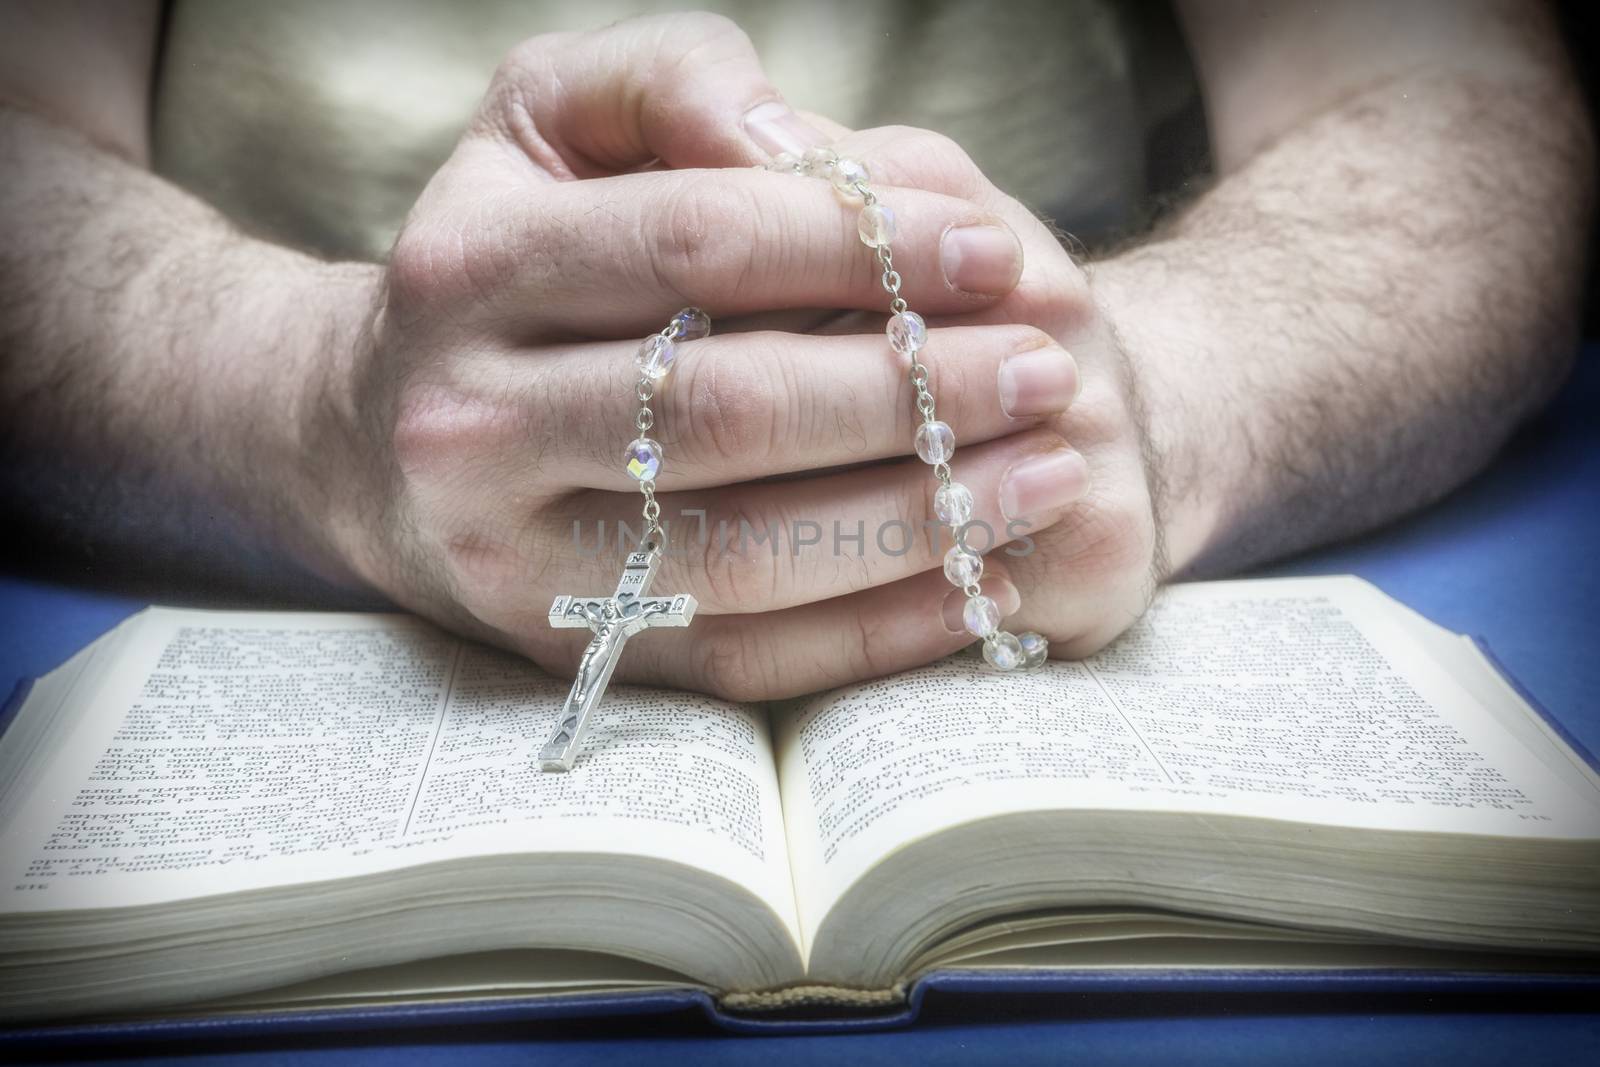 Christian believer praying to God with rosary in hand by digicomphoto